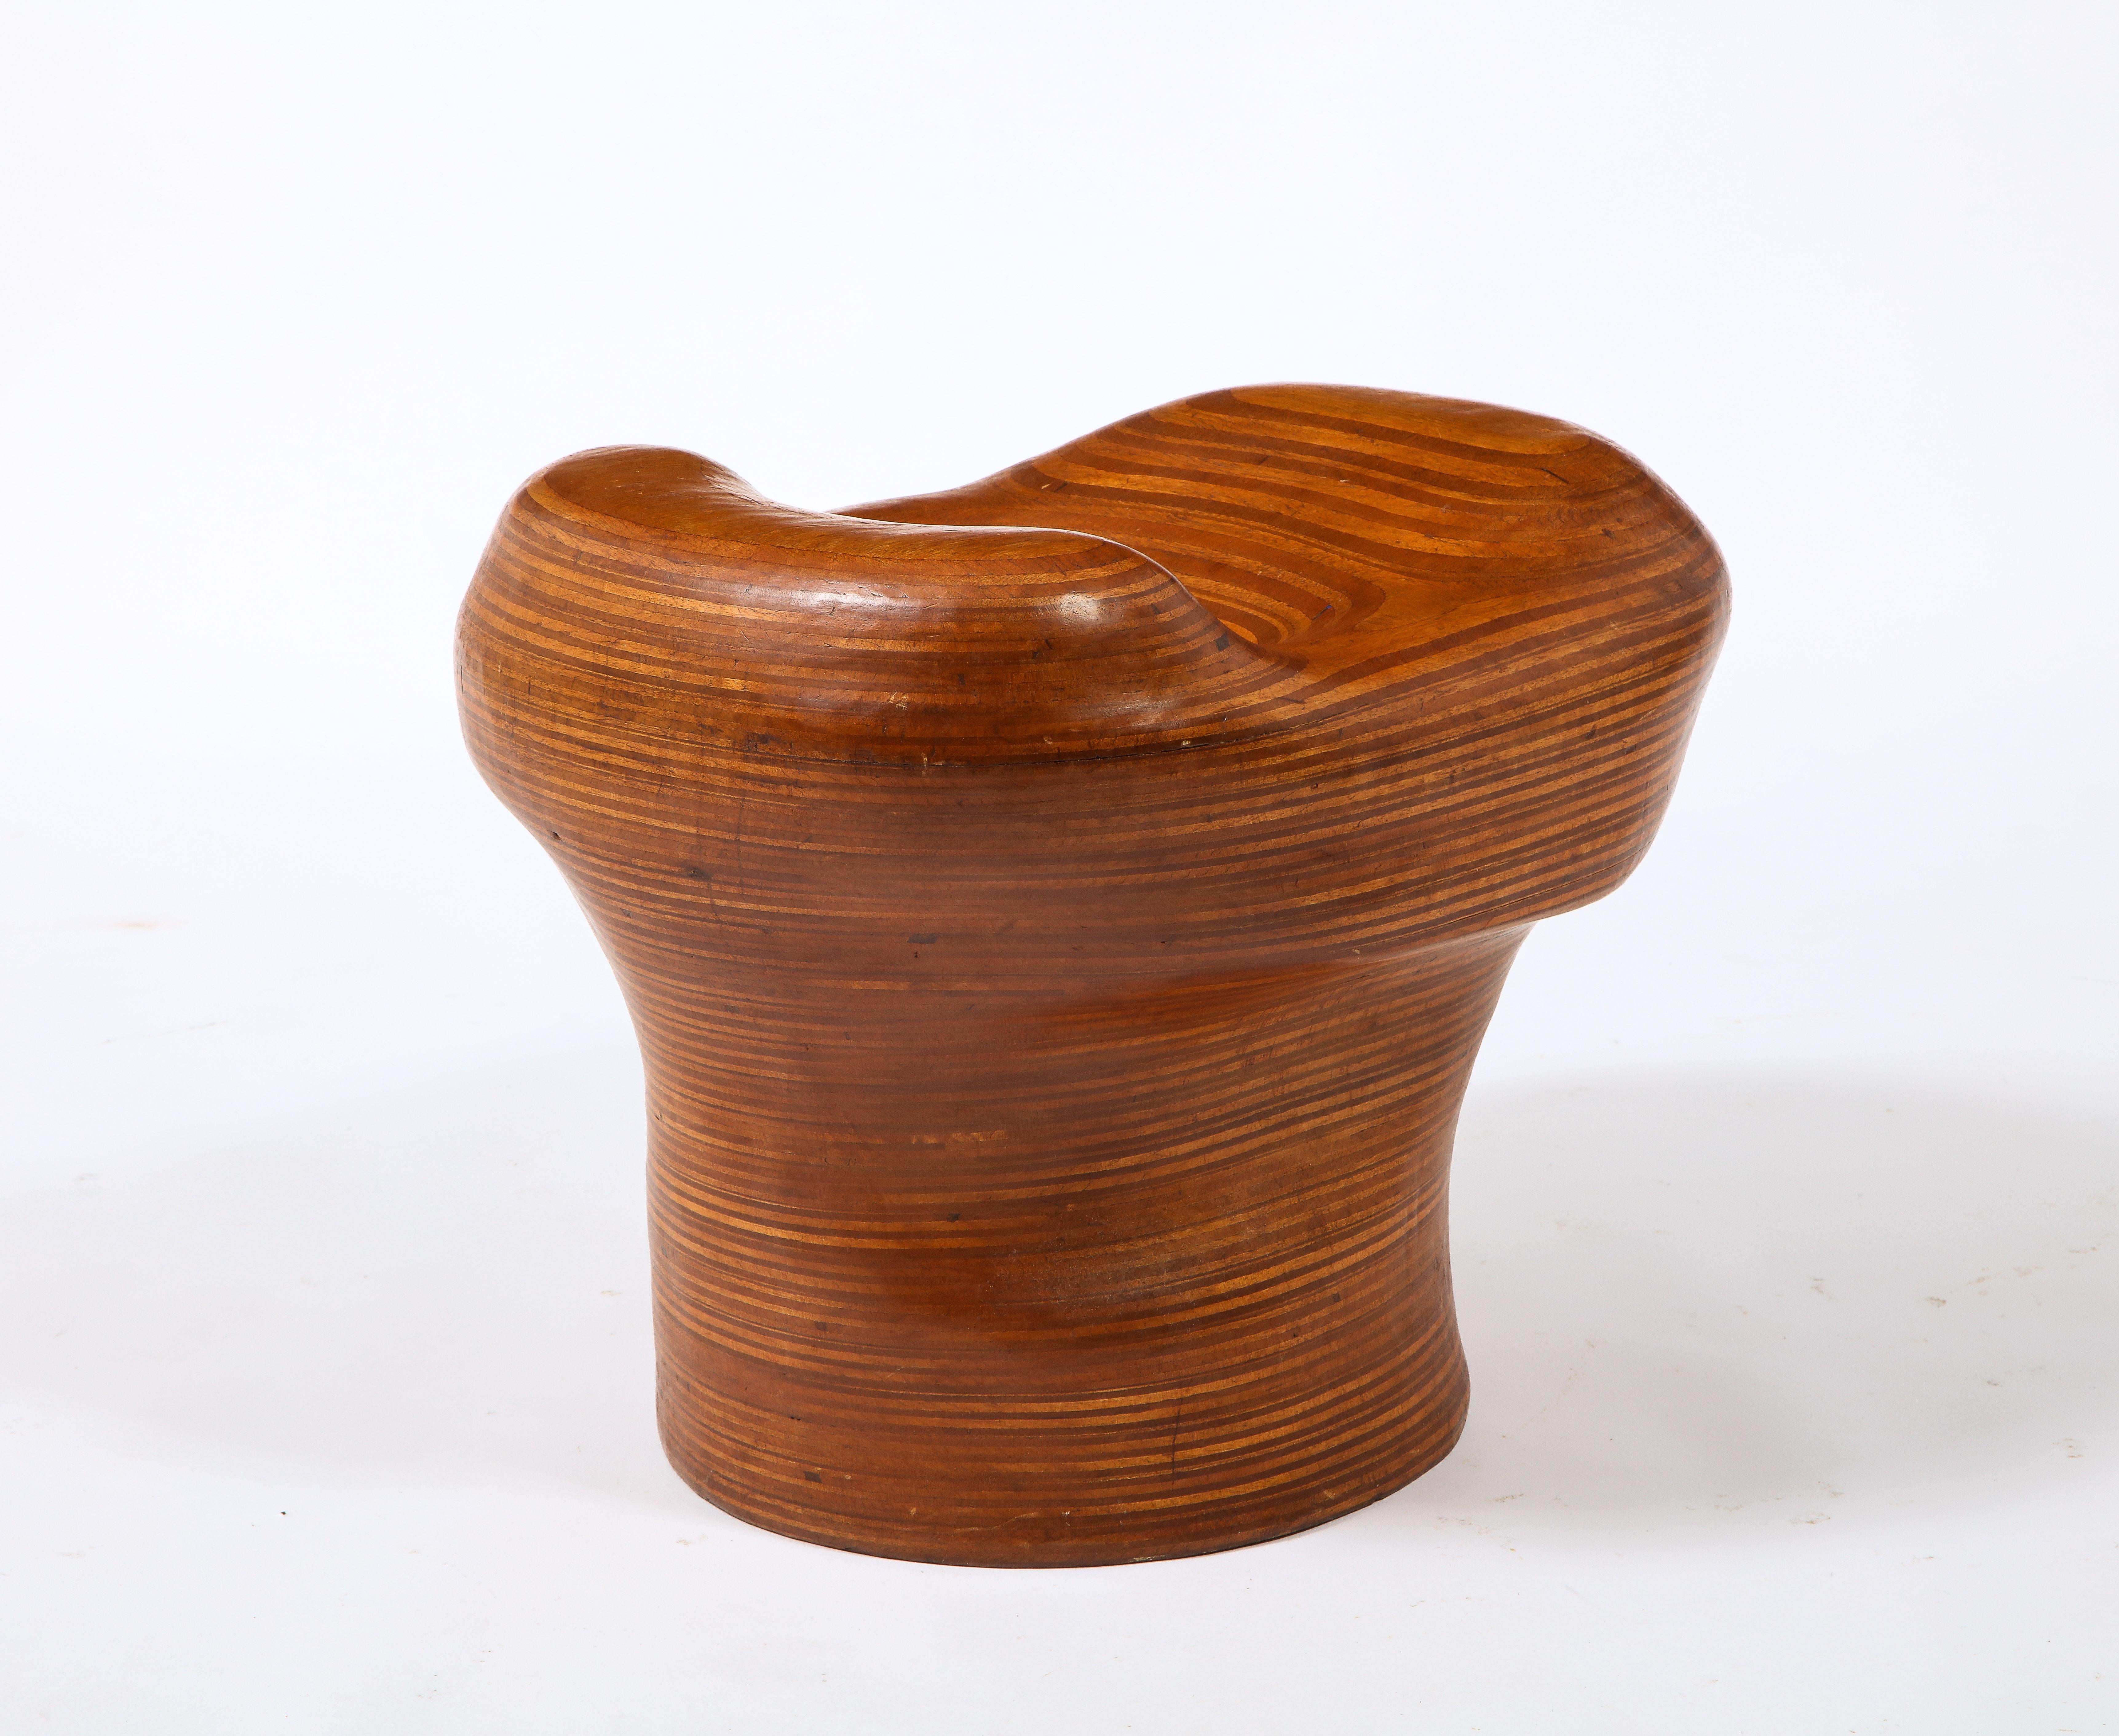 Denis Cospen Biomorphic Stool in Laminated Wood, France 1960's For Sale 6